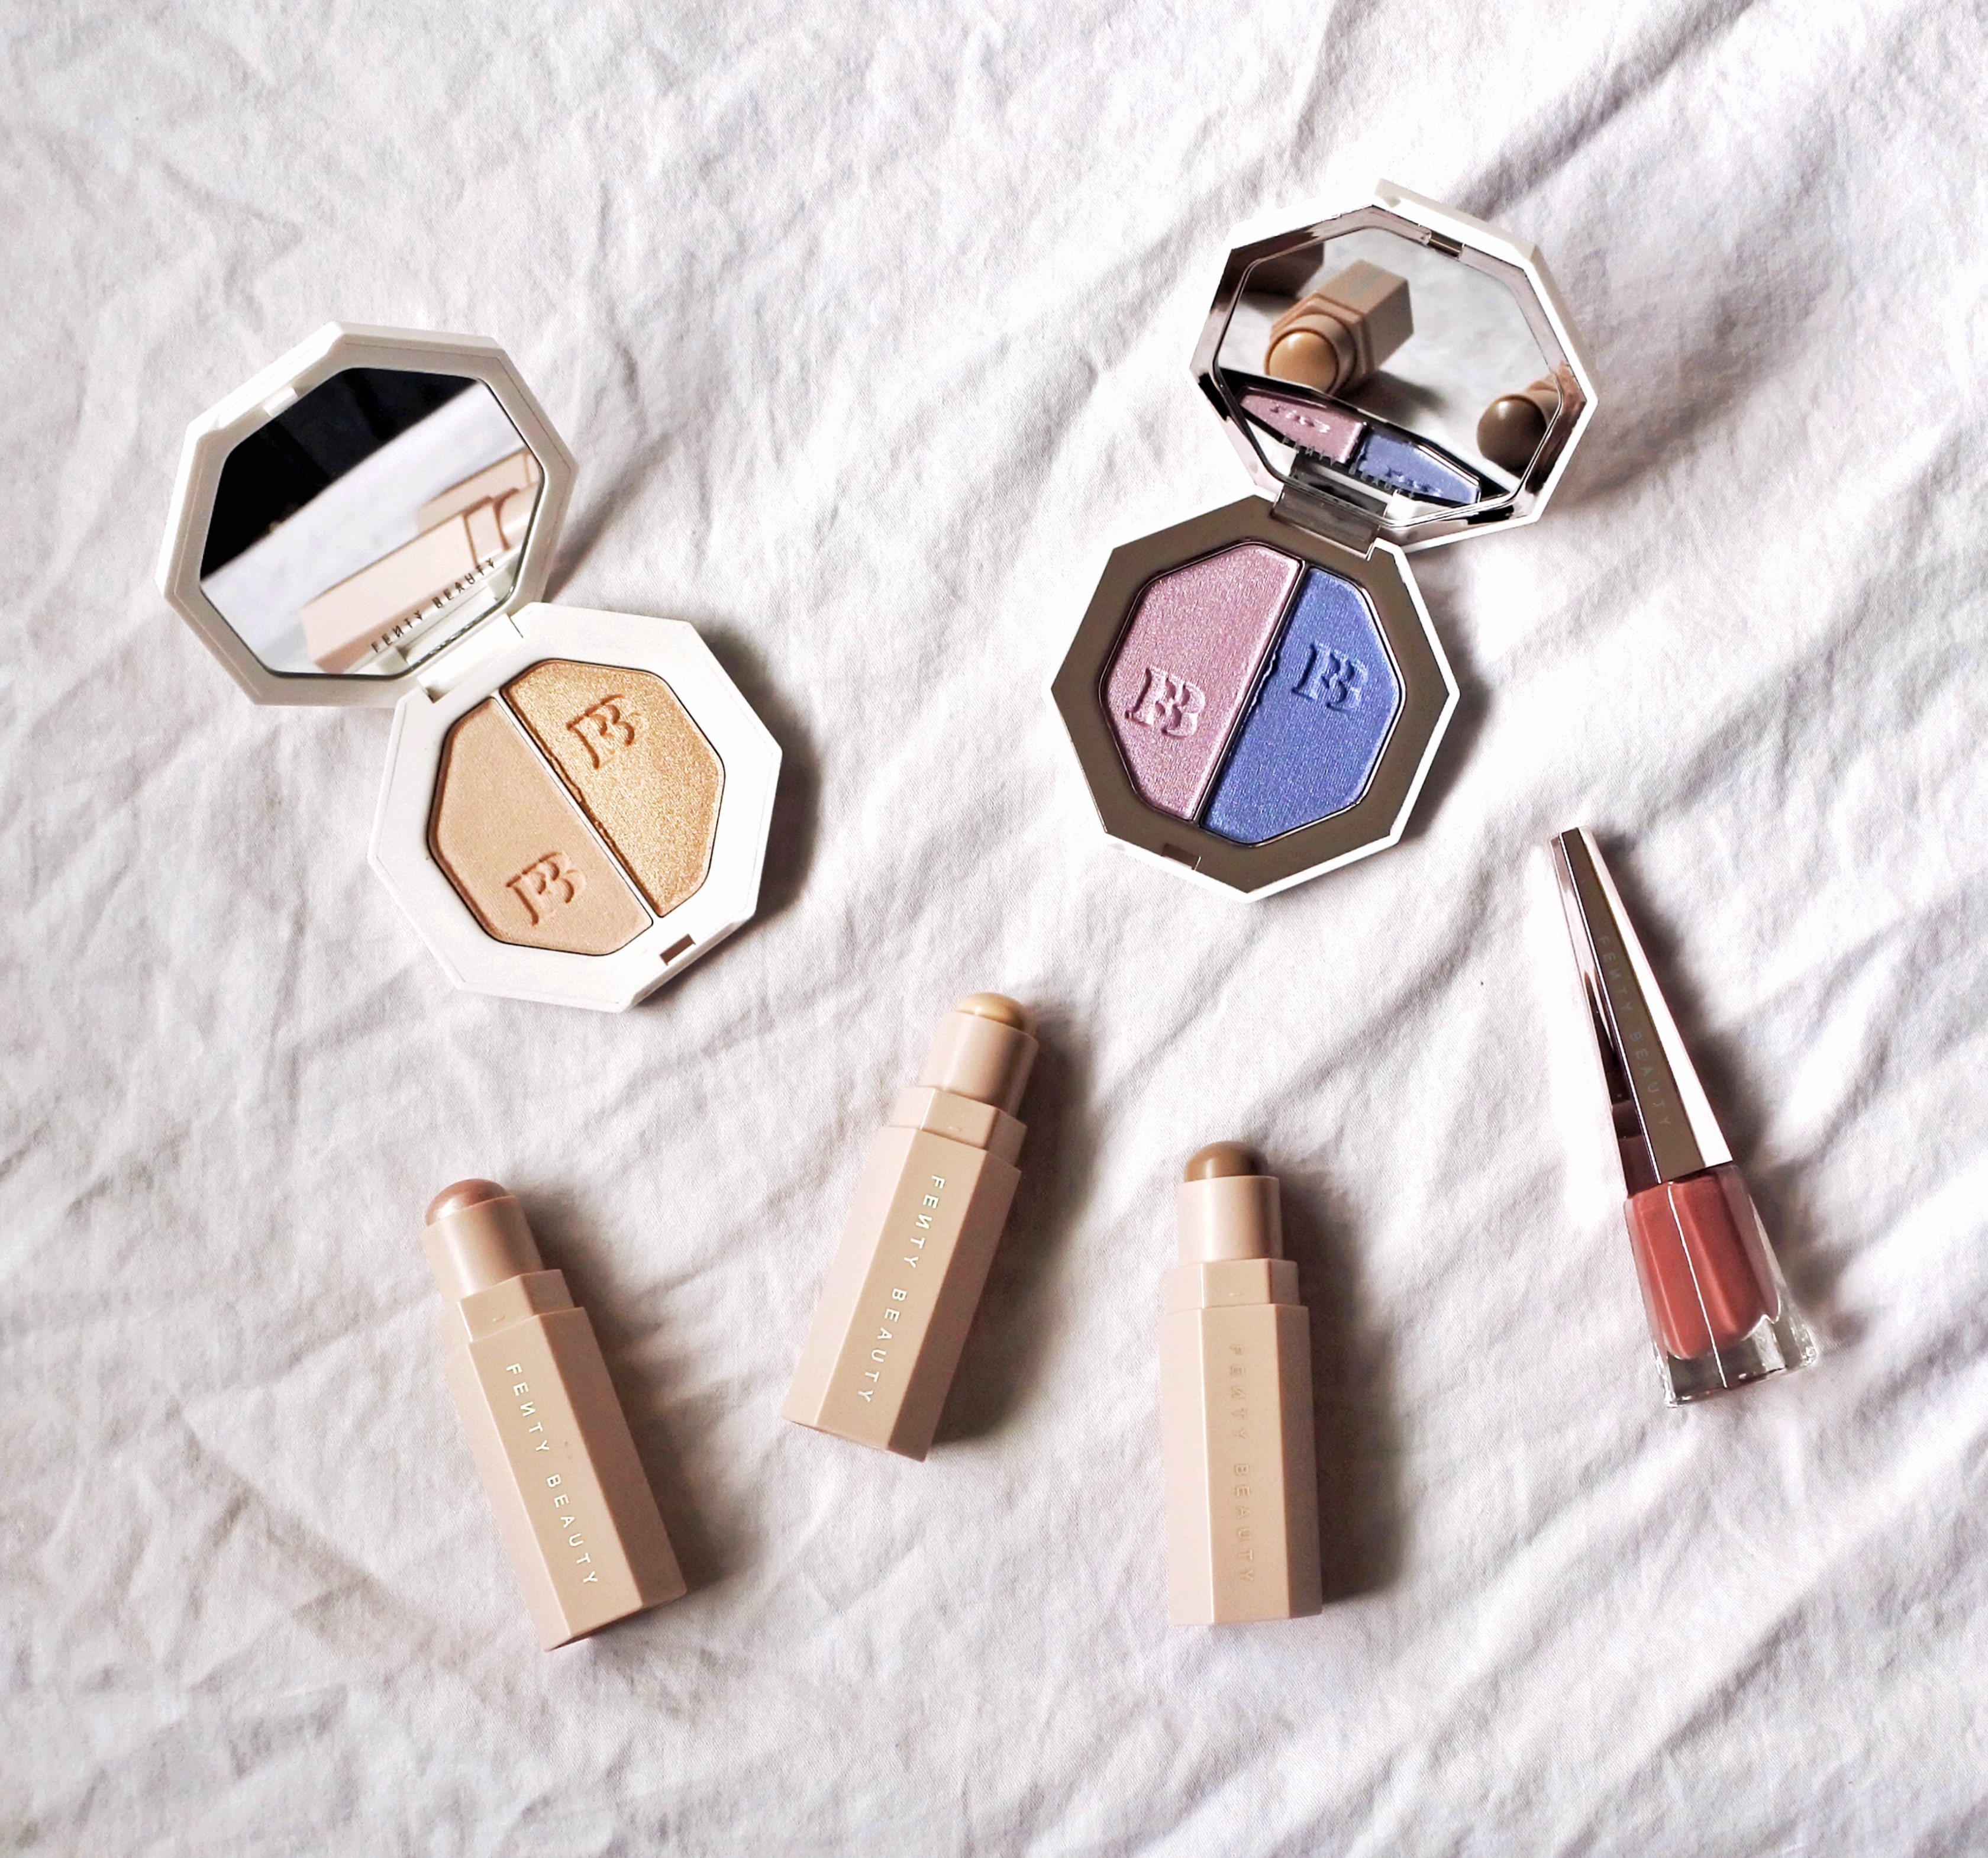 Fenty Beauty makeup products